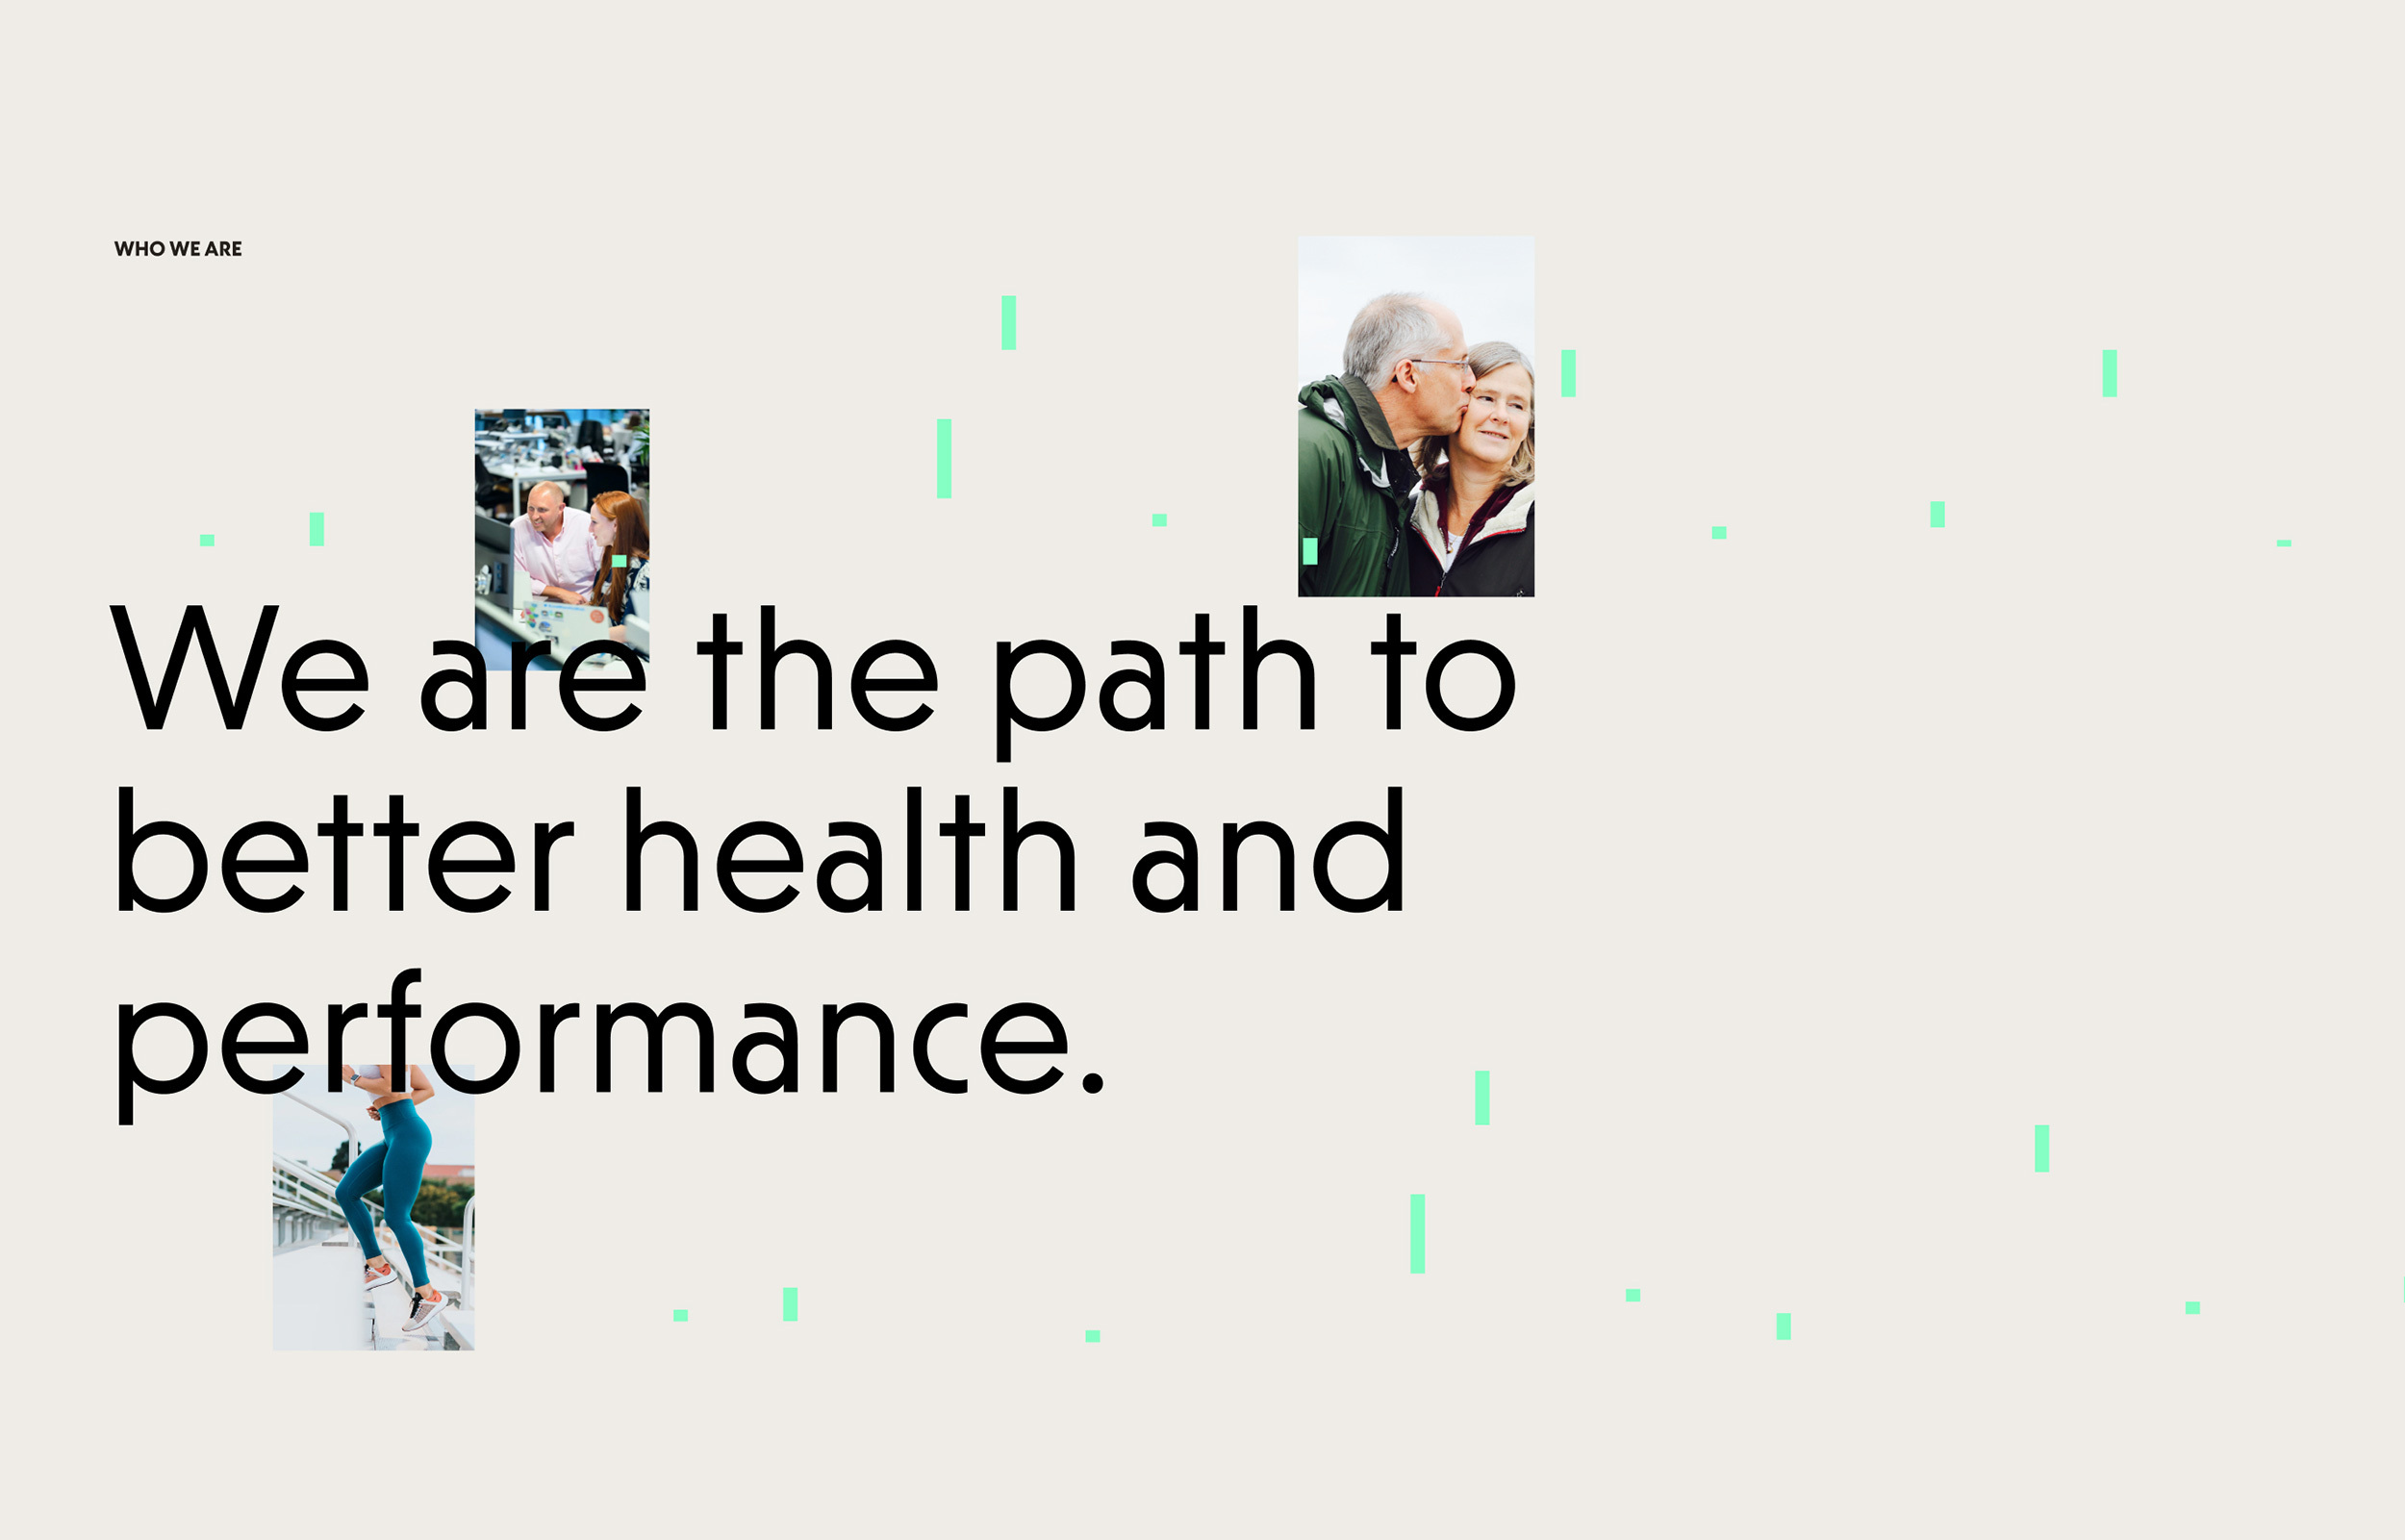 We are the path to a better health and performance